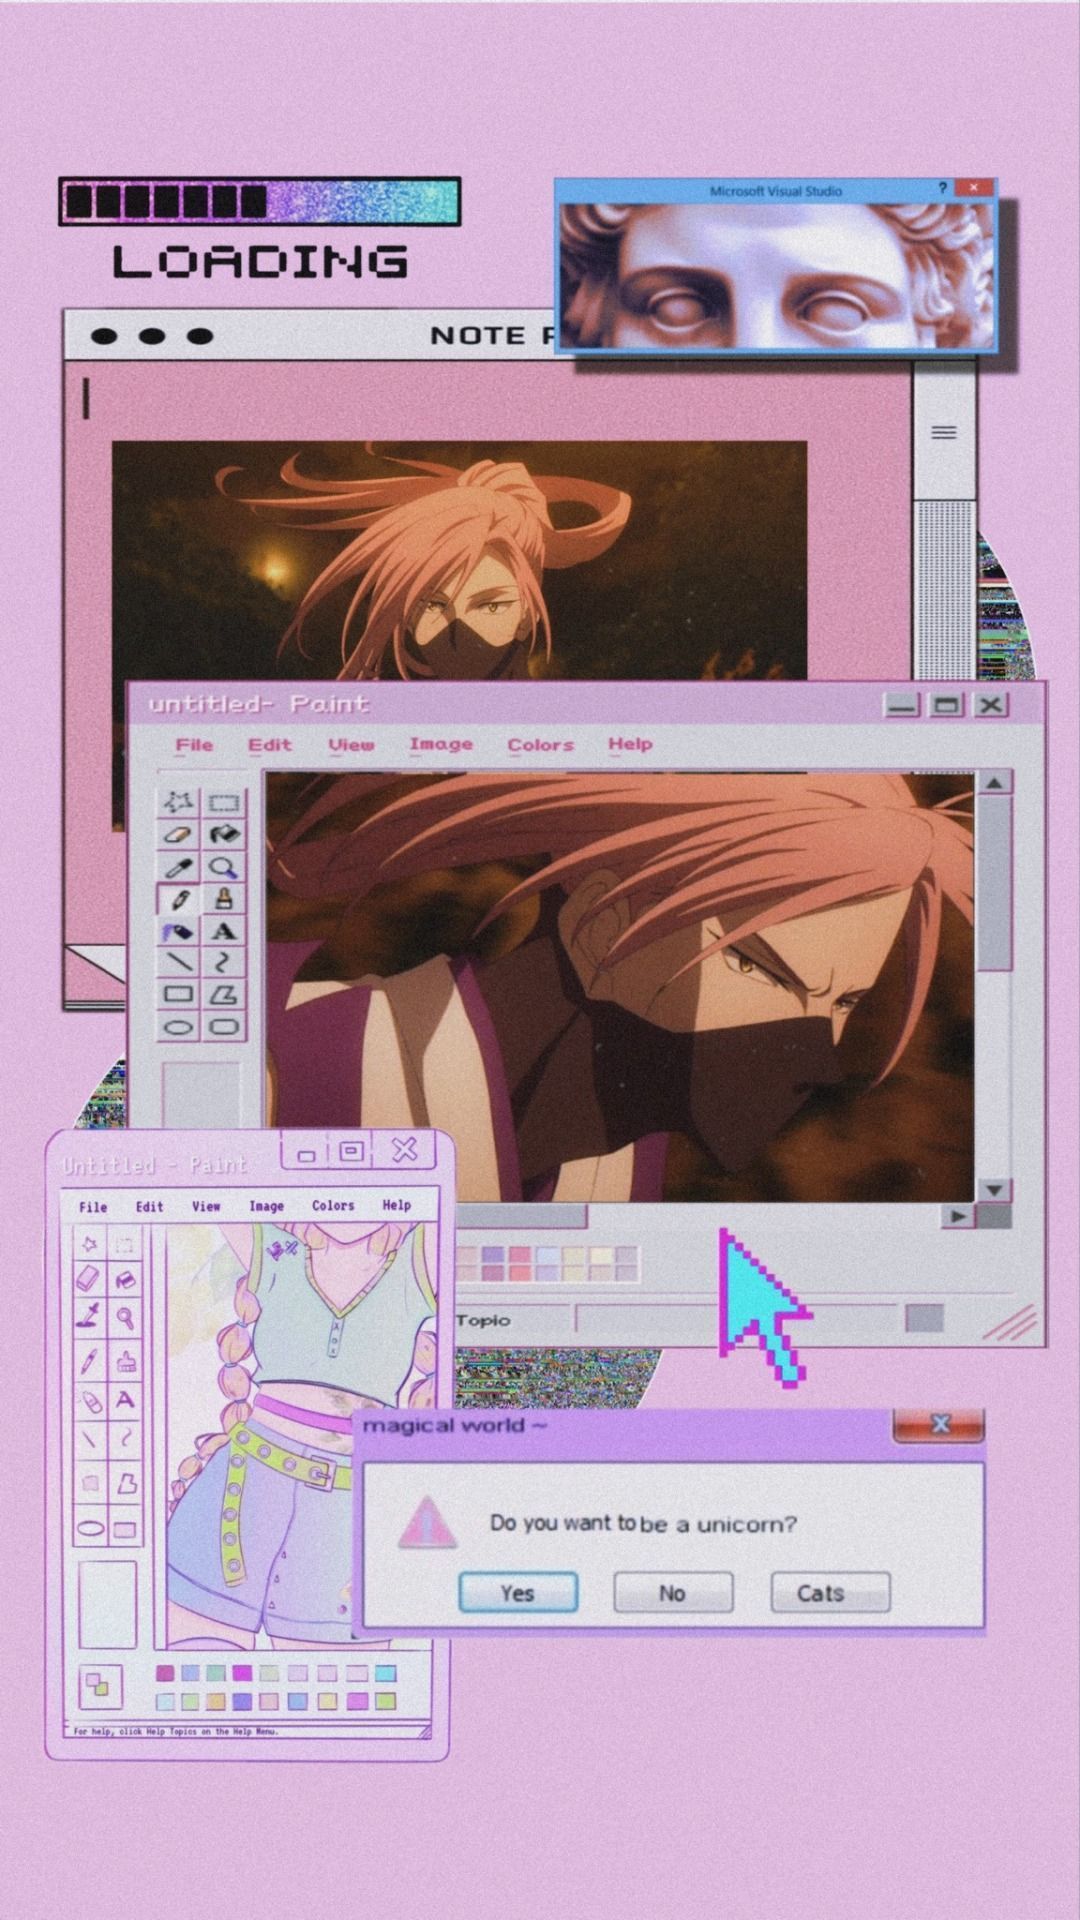 Aesthetic anime background with pink hair girl and loading screens - Webcore